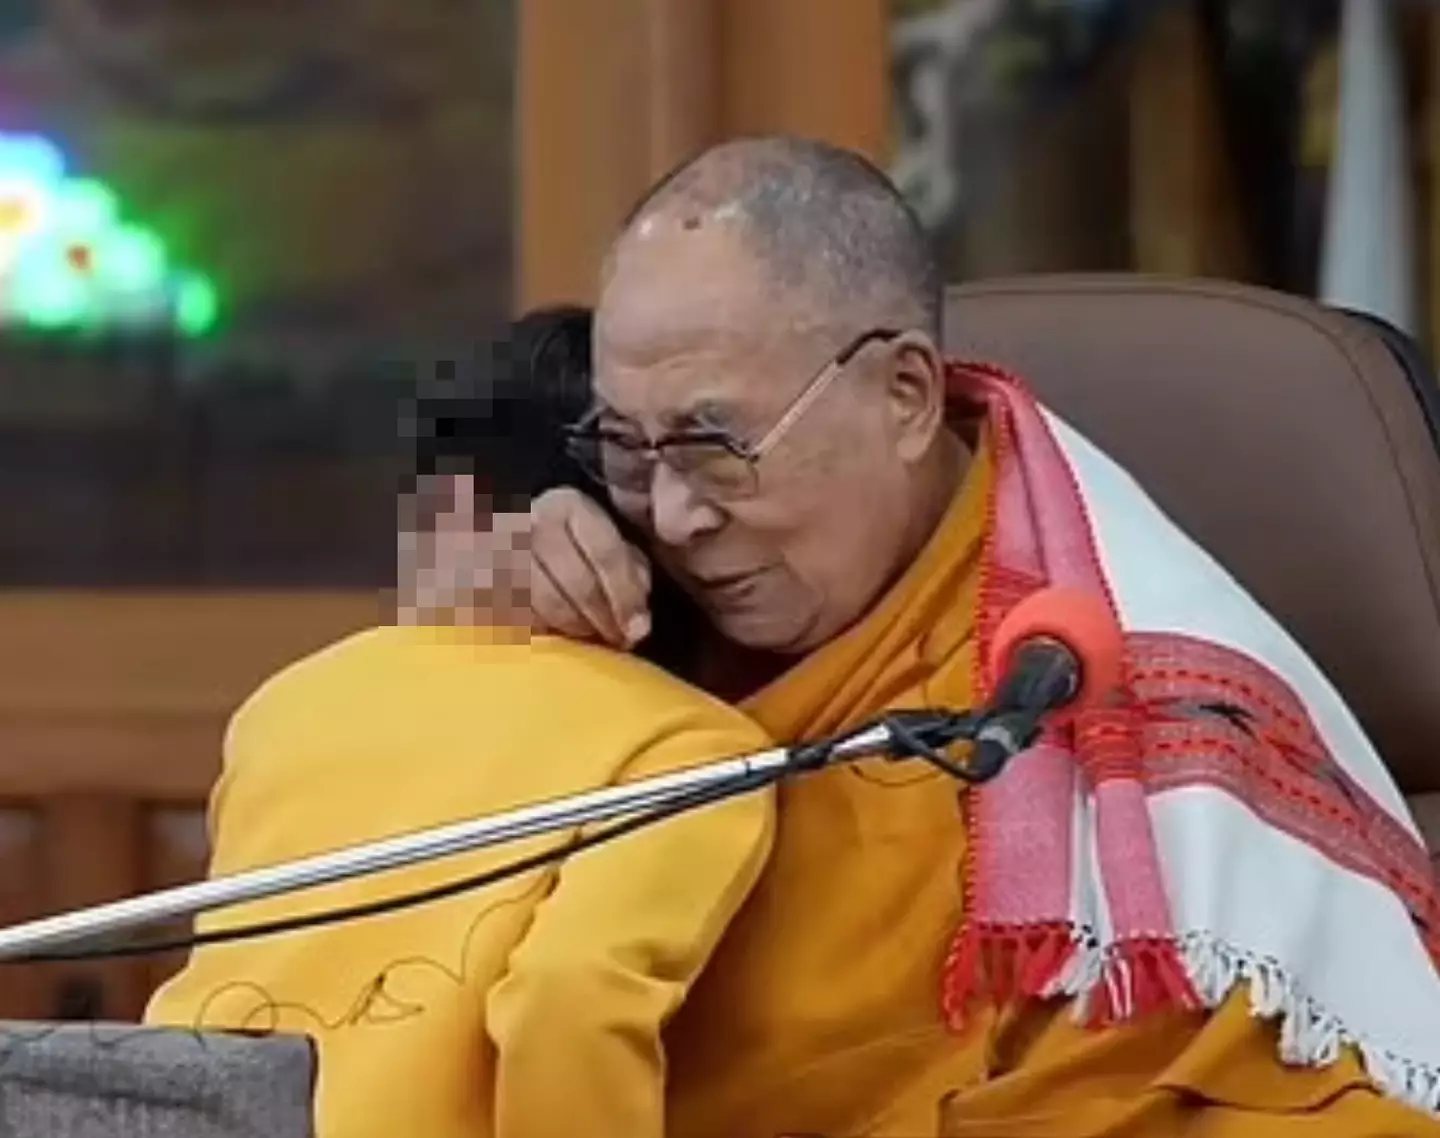 The Dalai Lama was seen hugging and kissing the child.